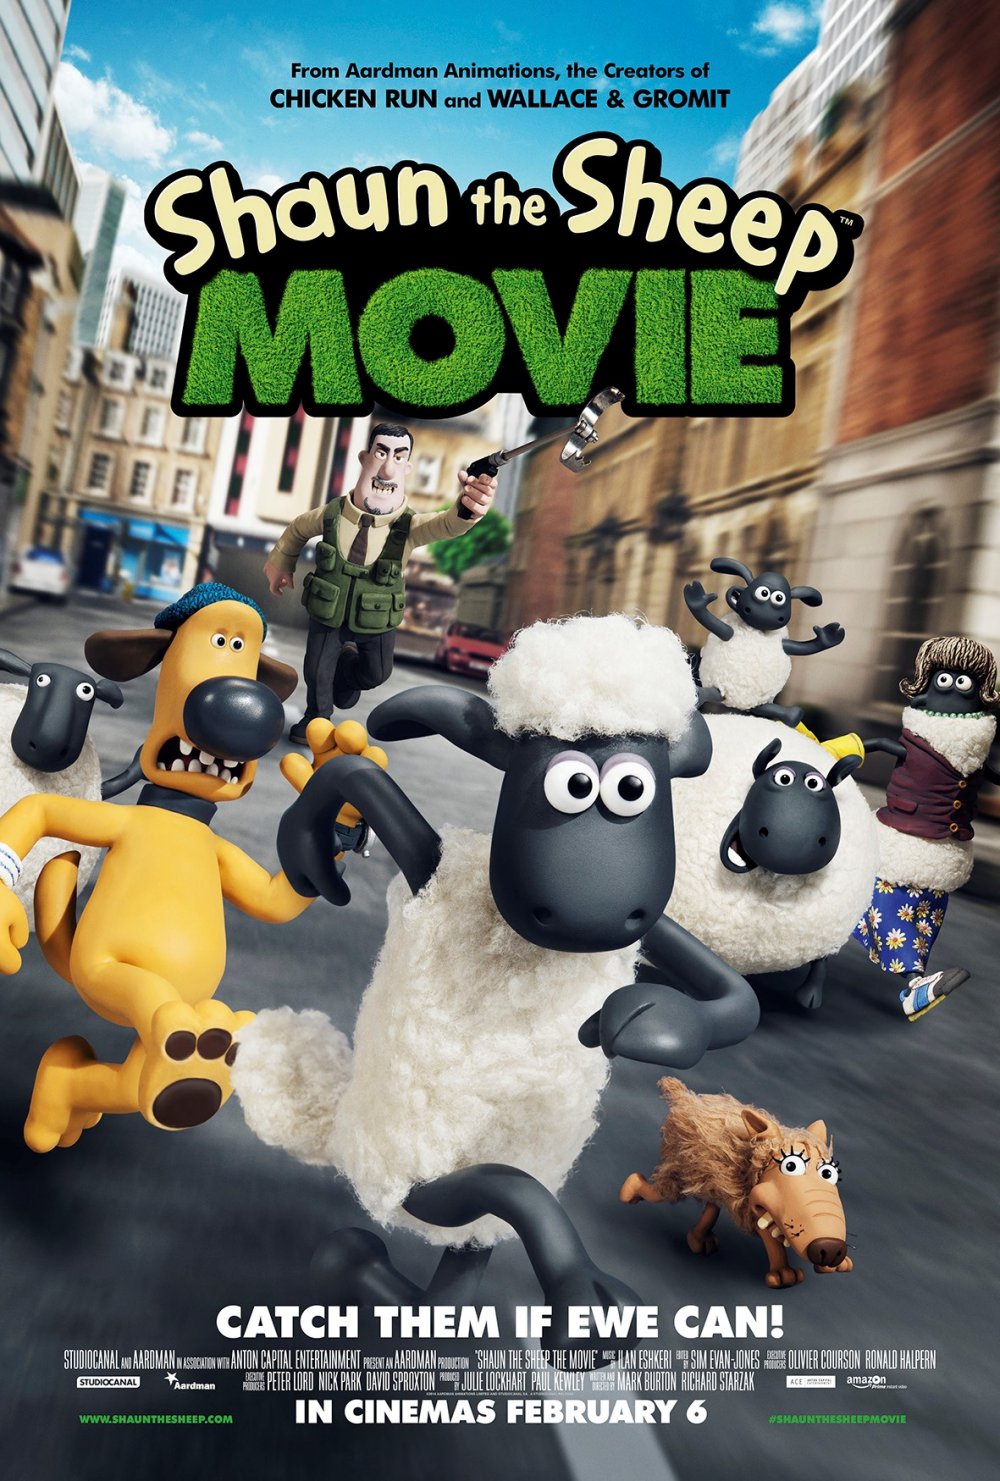 Shaun The Sheep – Chase poster one sheet